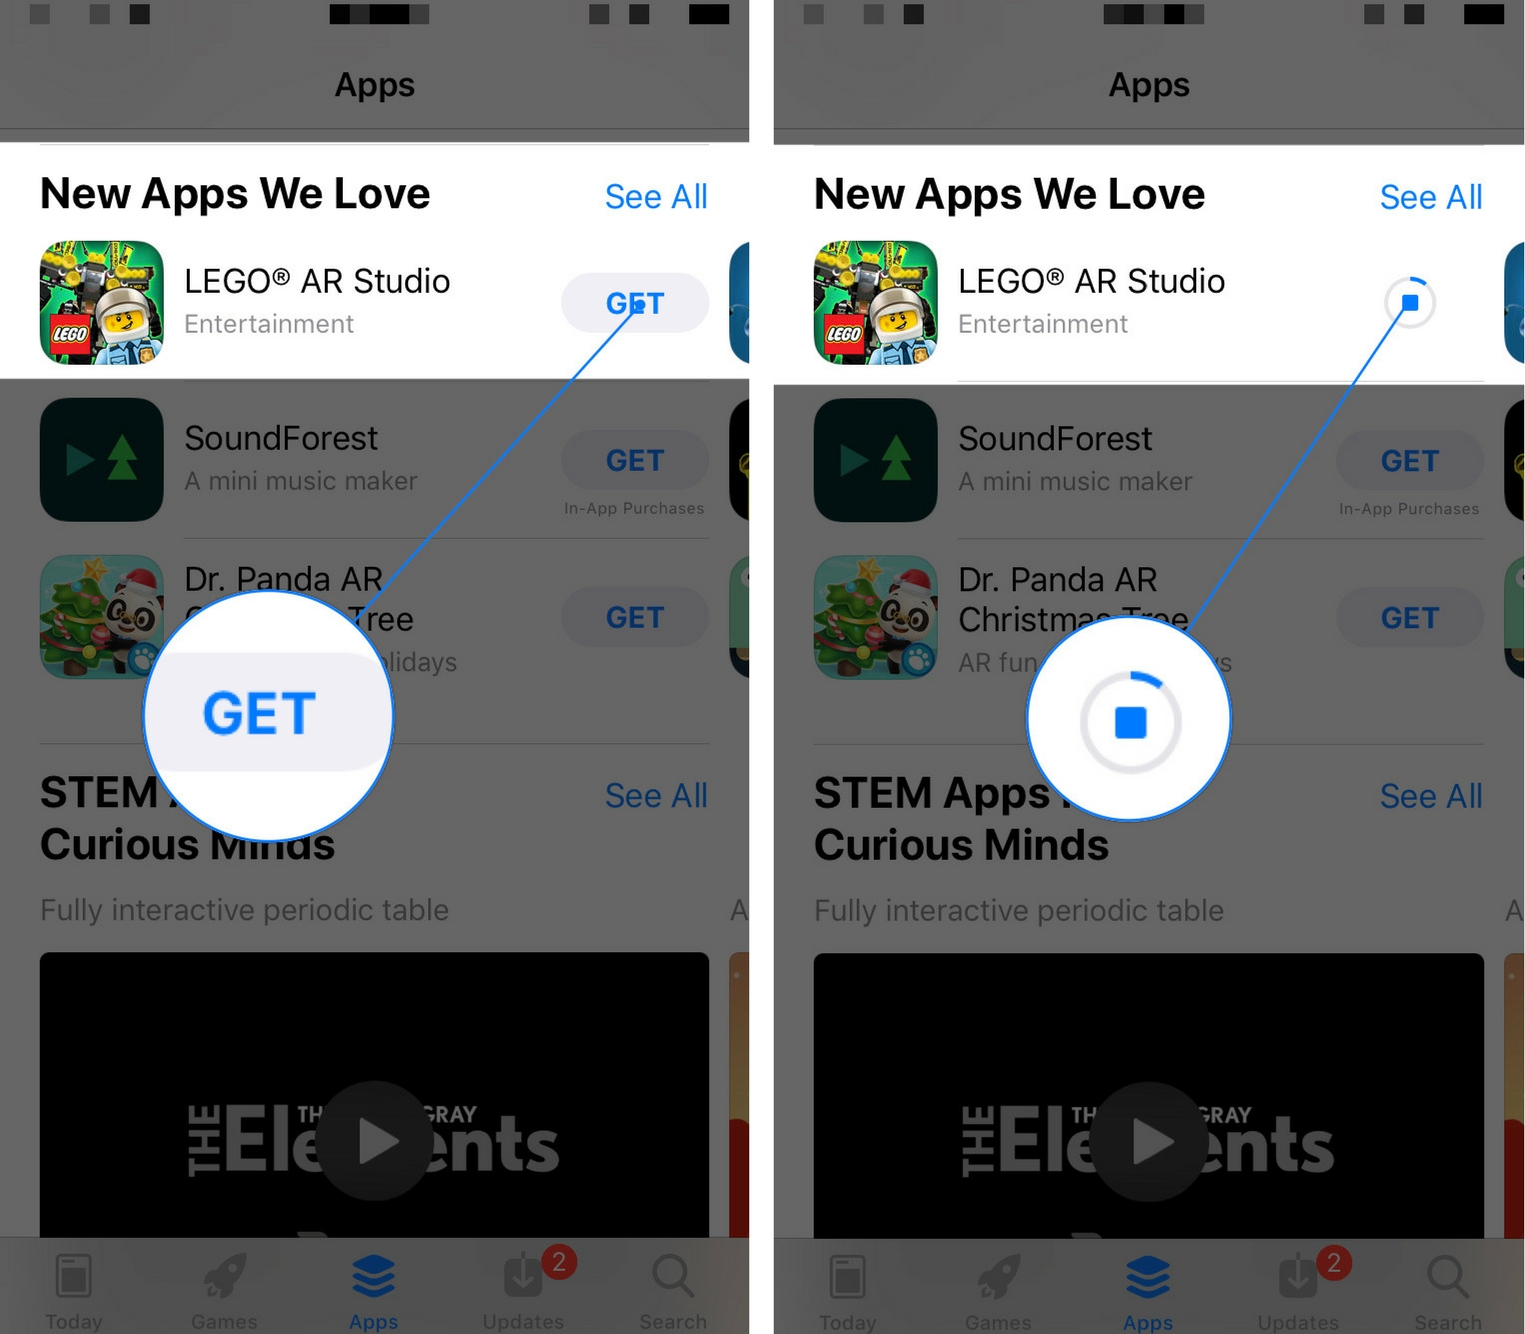 How To Download Apps On iPhone: The Complete Guide!